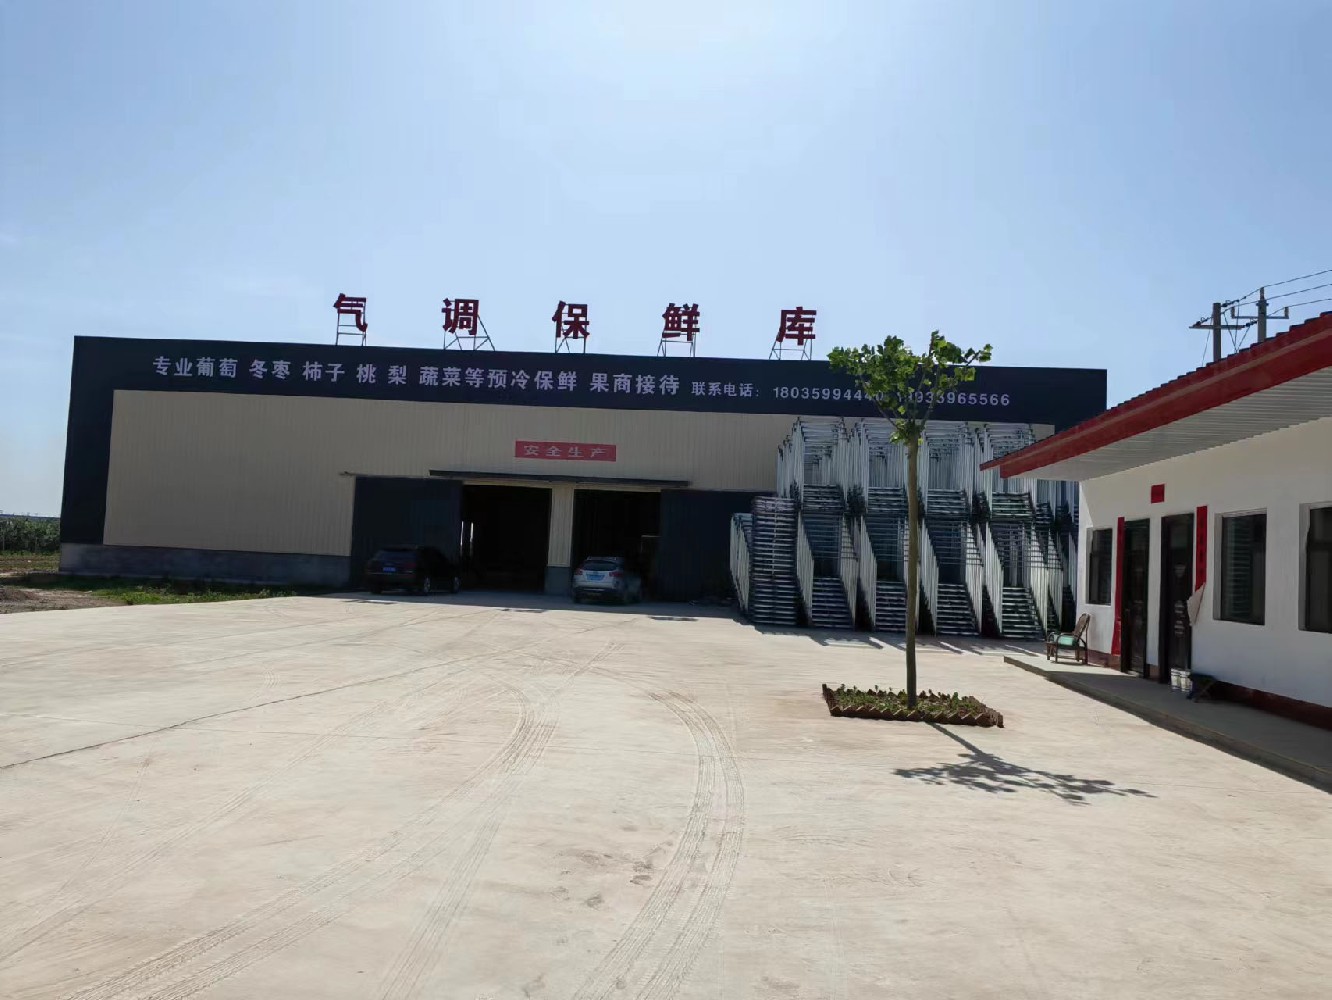 Case display of air-conditioned cold store in Jilin